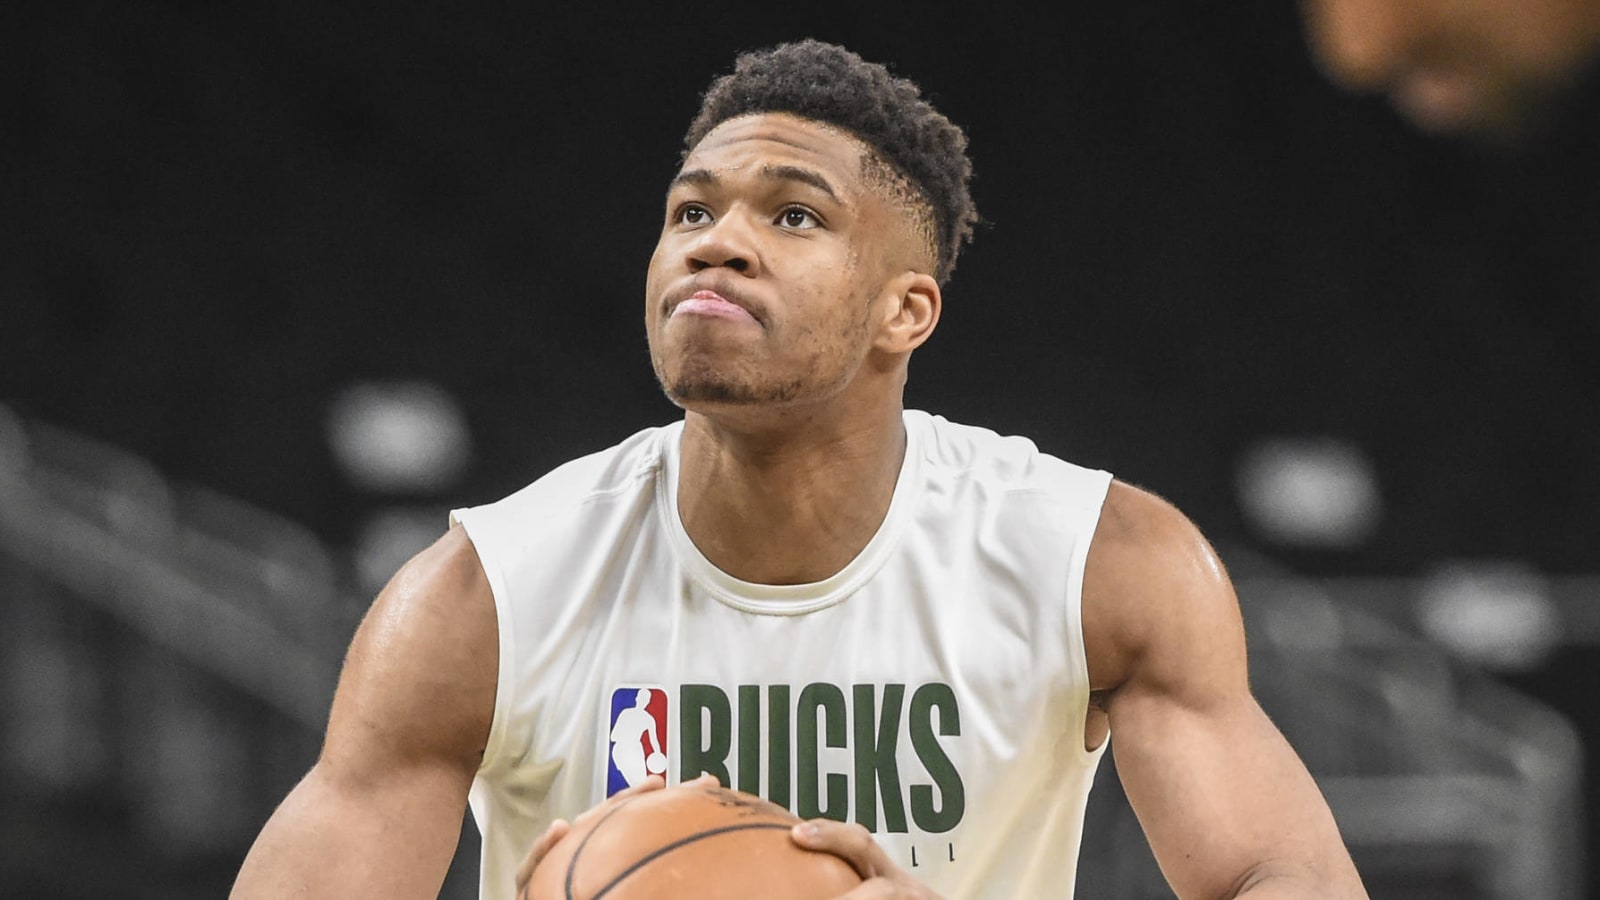 Watch: Giannis has great reaction to girlfriend saying she used to be Lakers fan